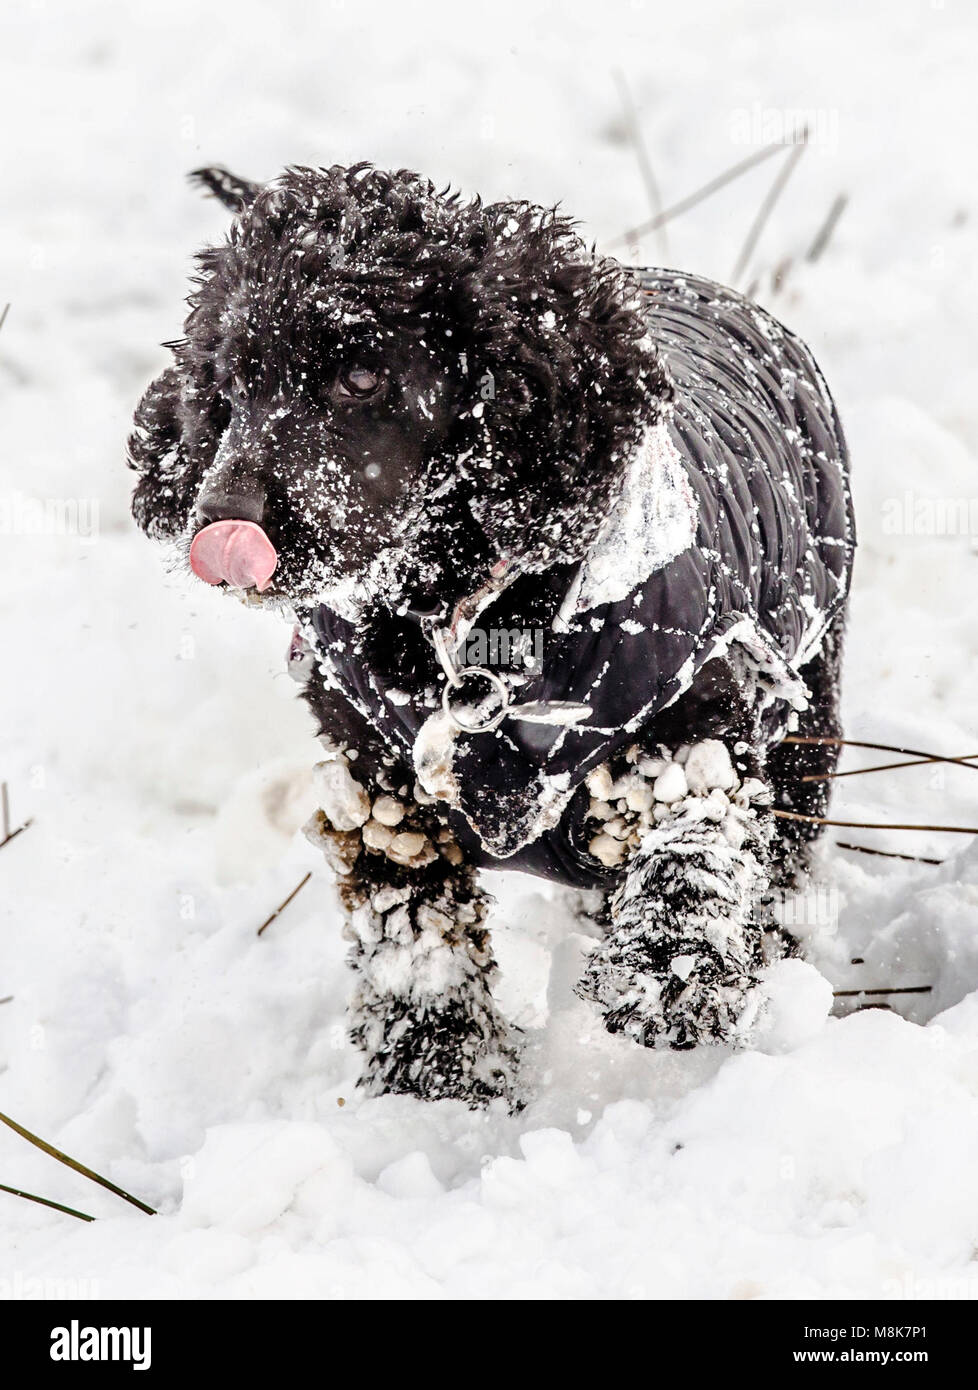 Zara the dog plays in the snow in Chapel-en-le-Frith, Derbyshire, as the wintry snap dubbed the 'mini beast from the east' keeps its grip on the UK. Stock Photo